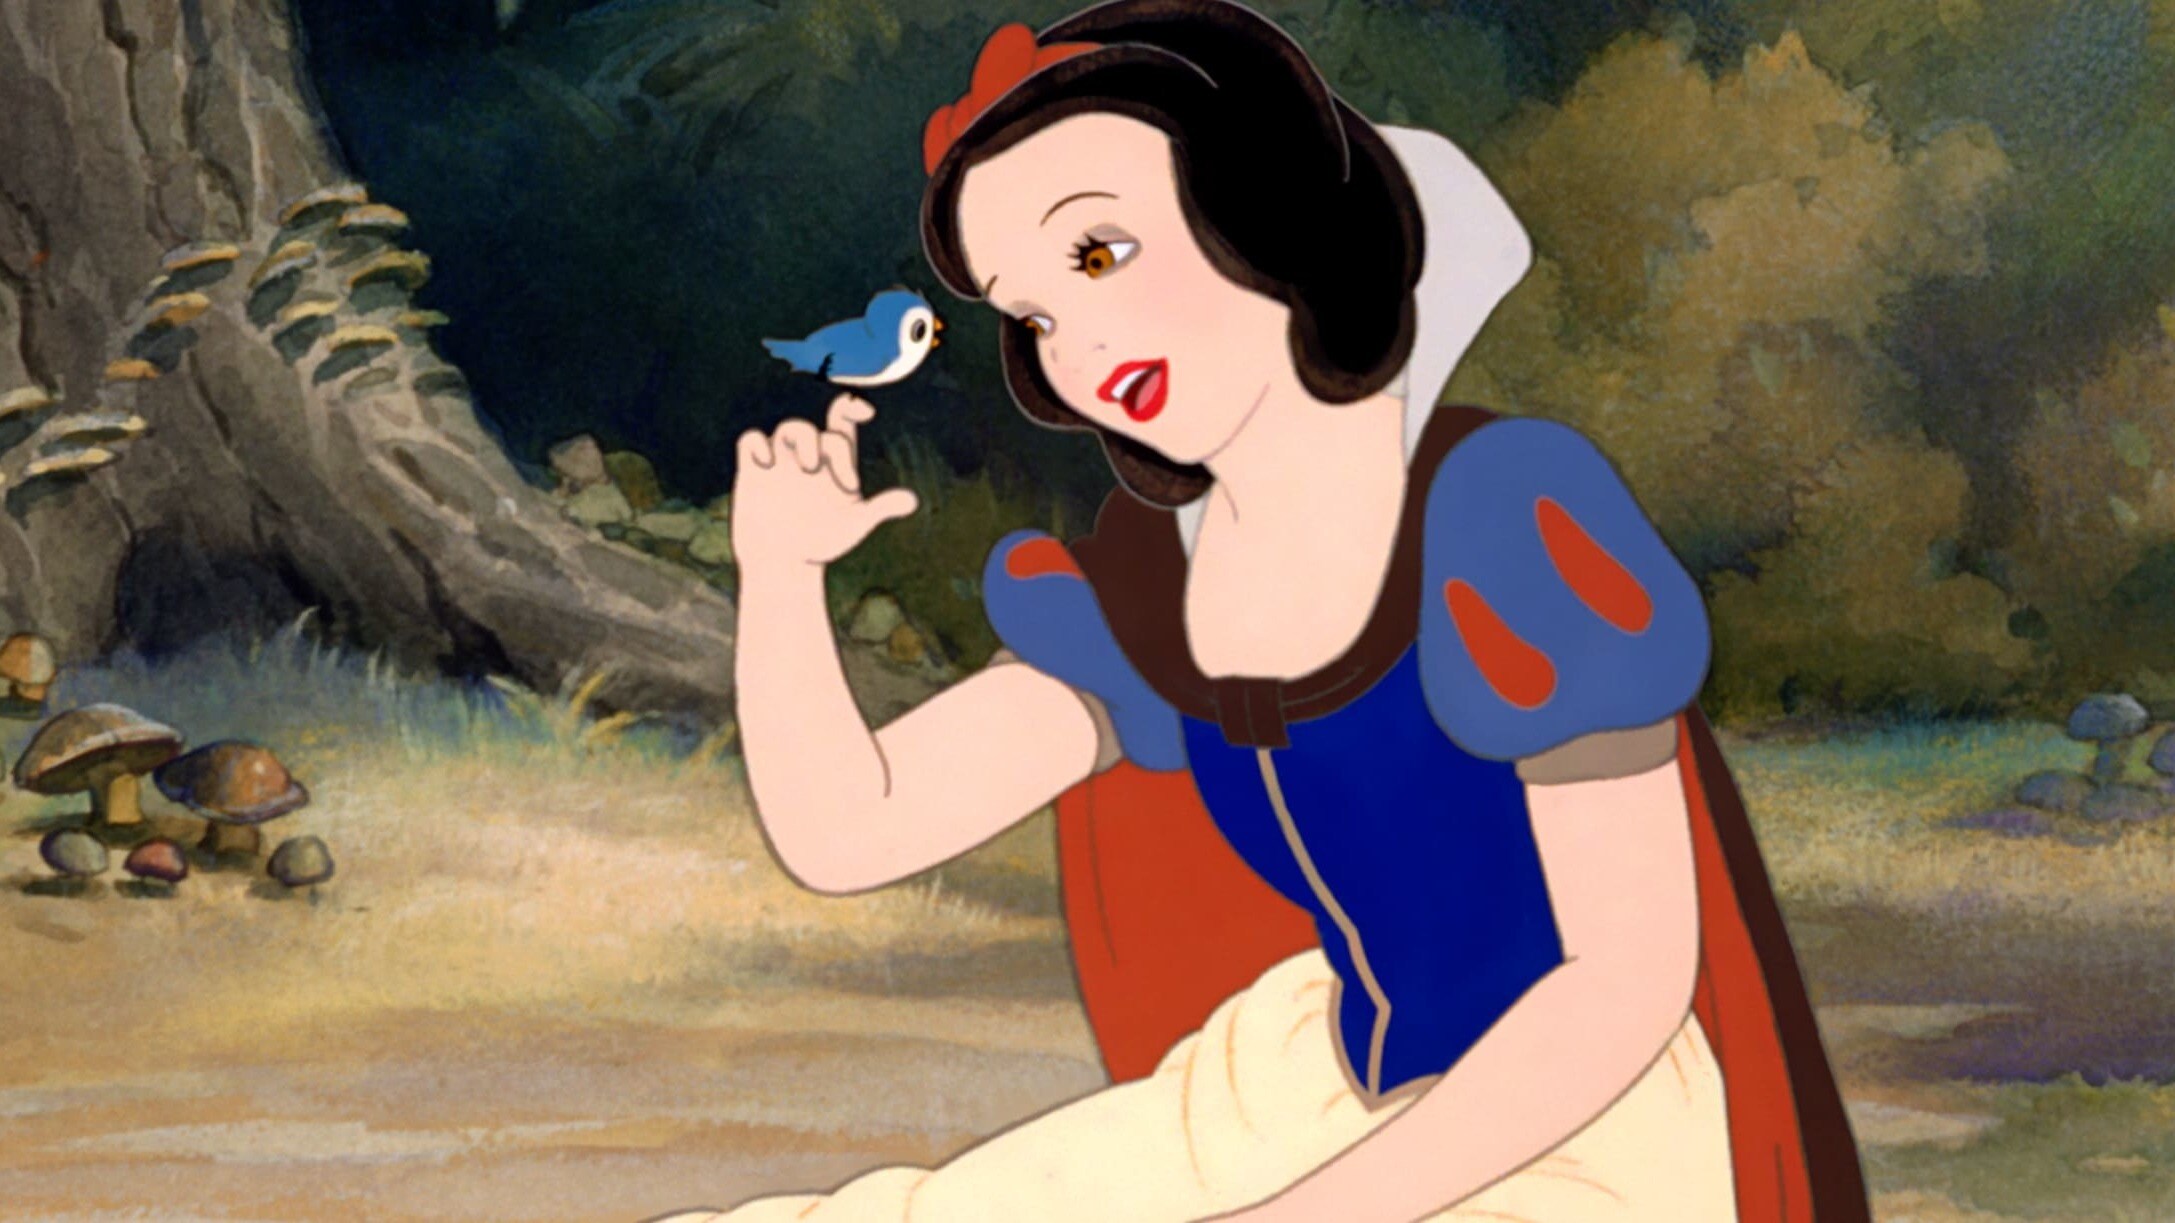 Snow White singing to her animal friends in the forest.